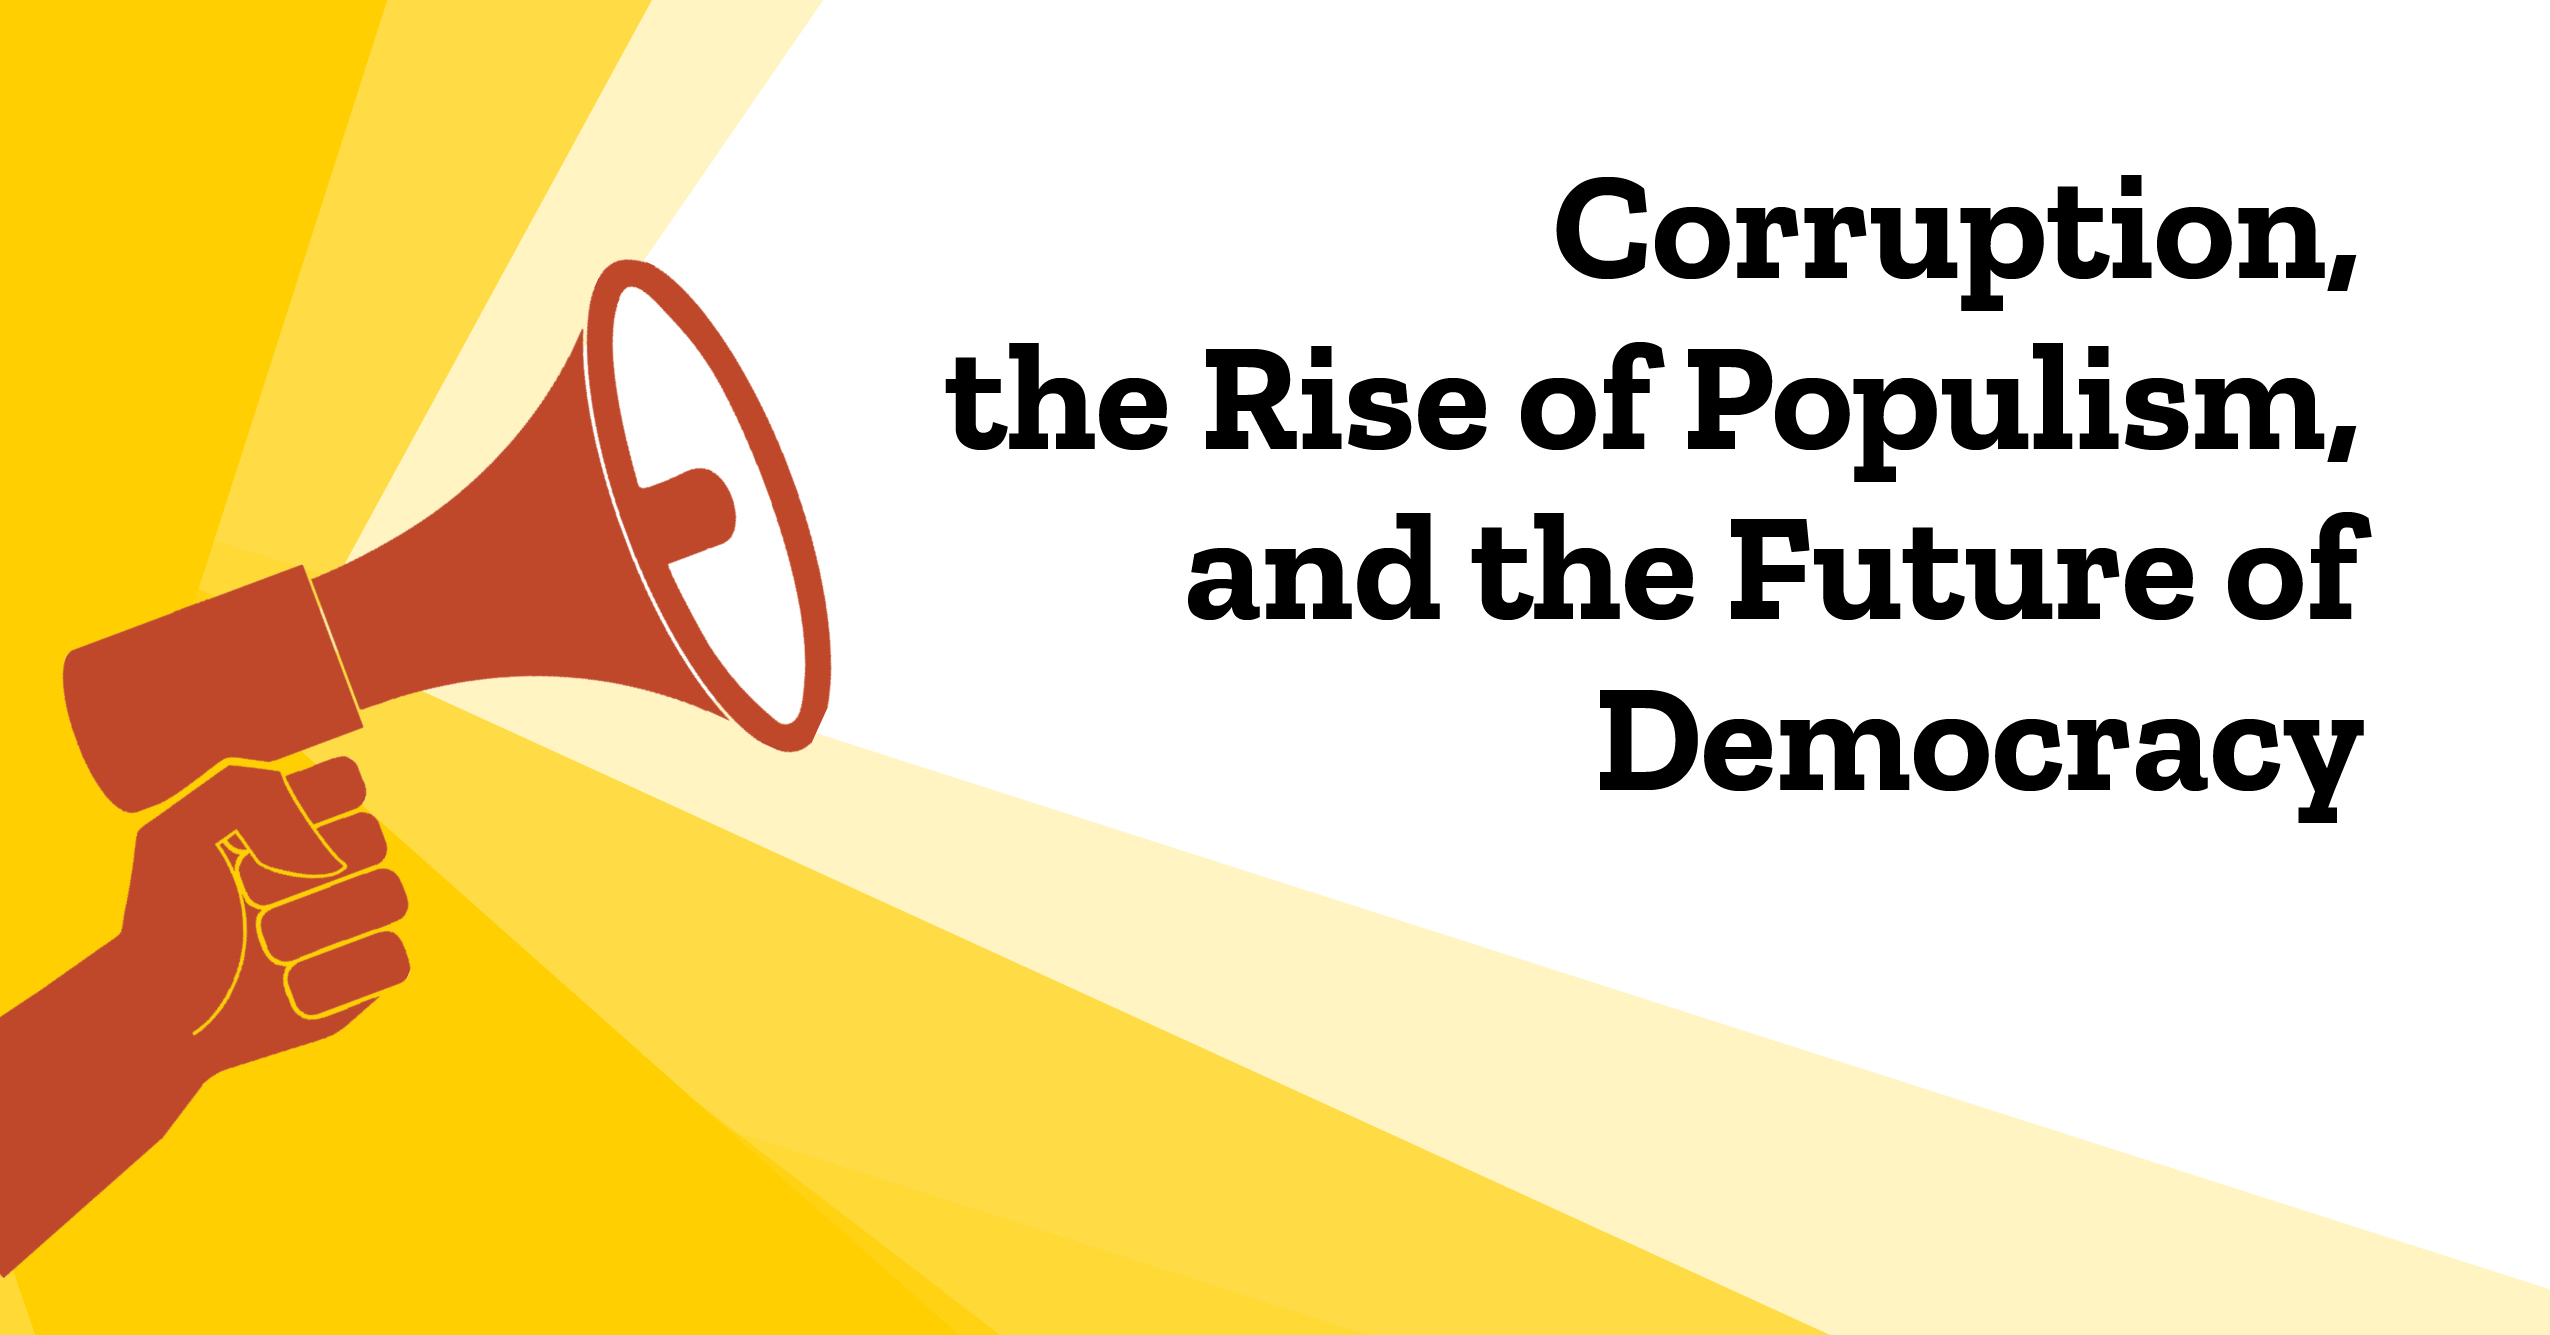 Corruption,  the Rise of Populism,  and the Future of Democracy with megaphone